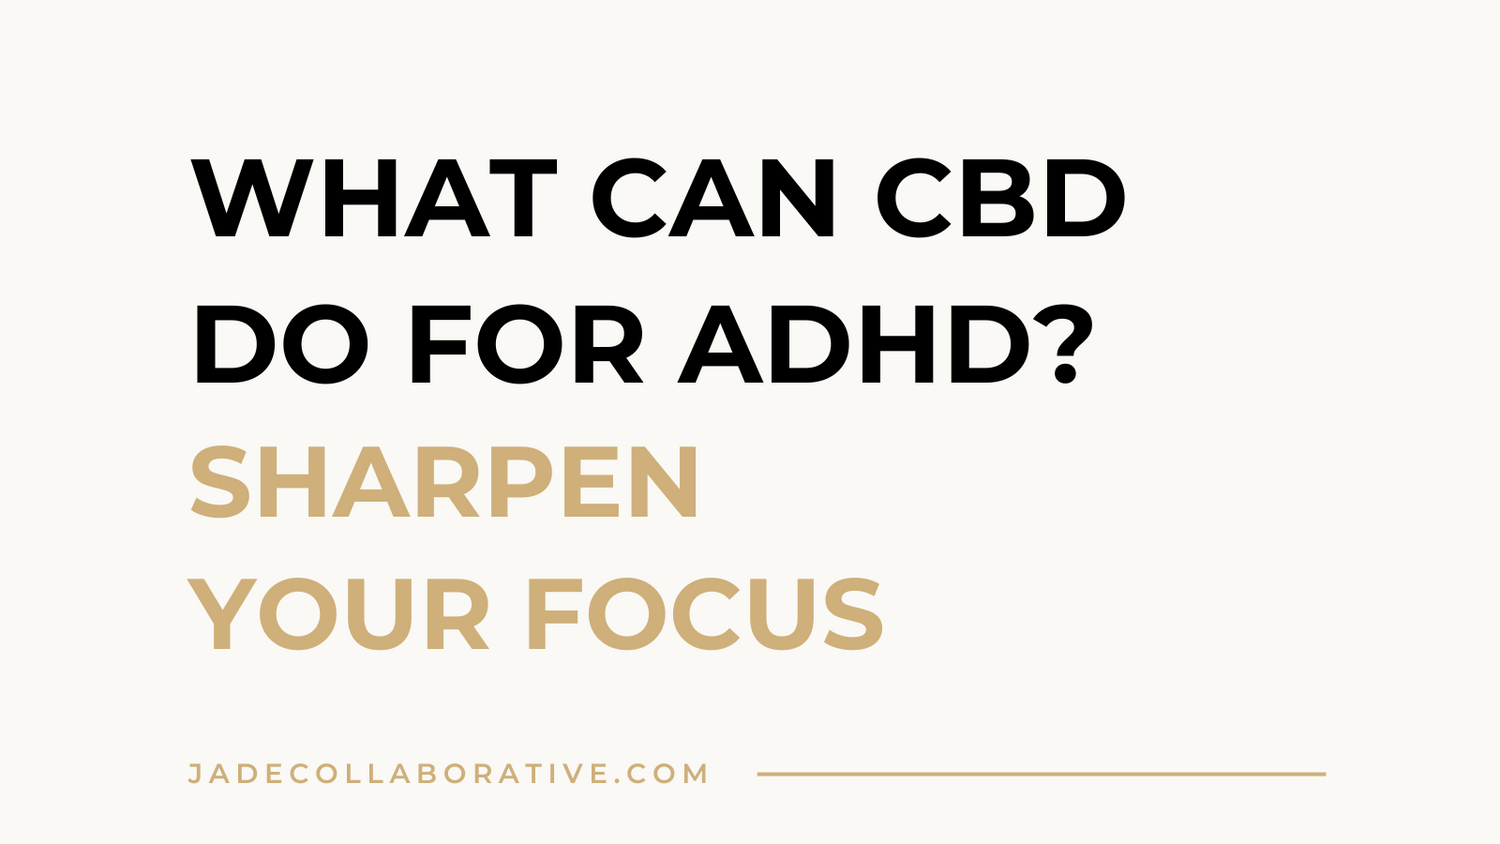 what can cbd do for adhd? by jade collaborative